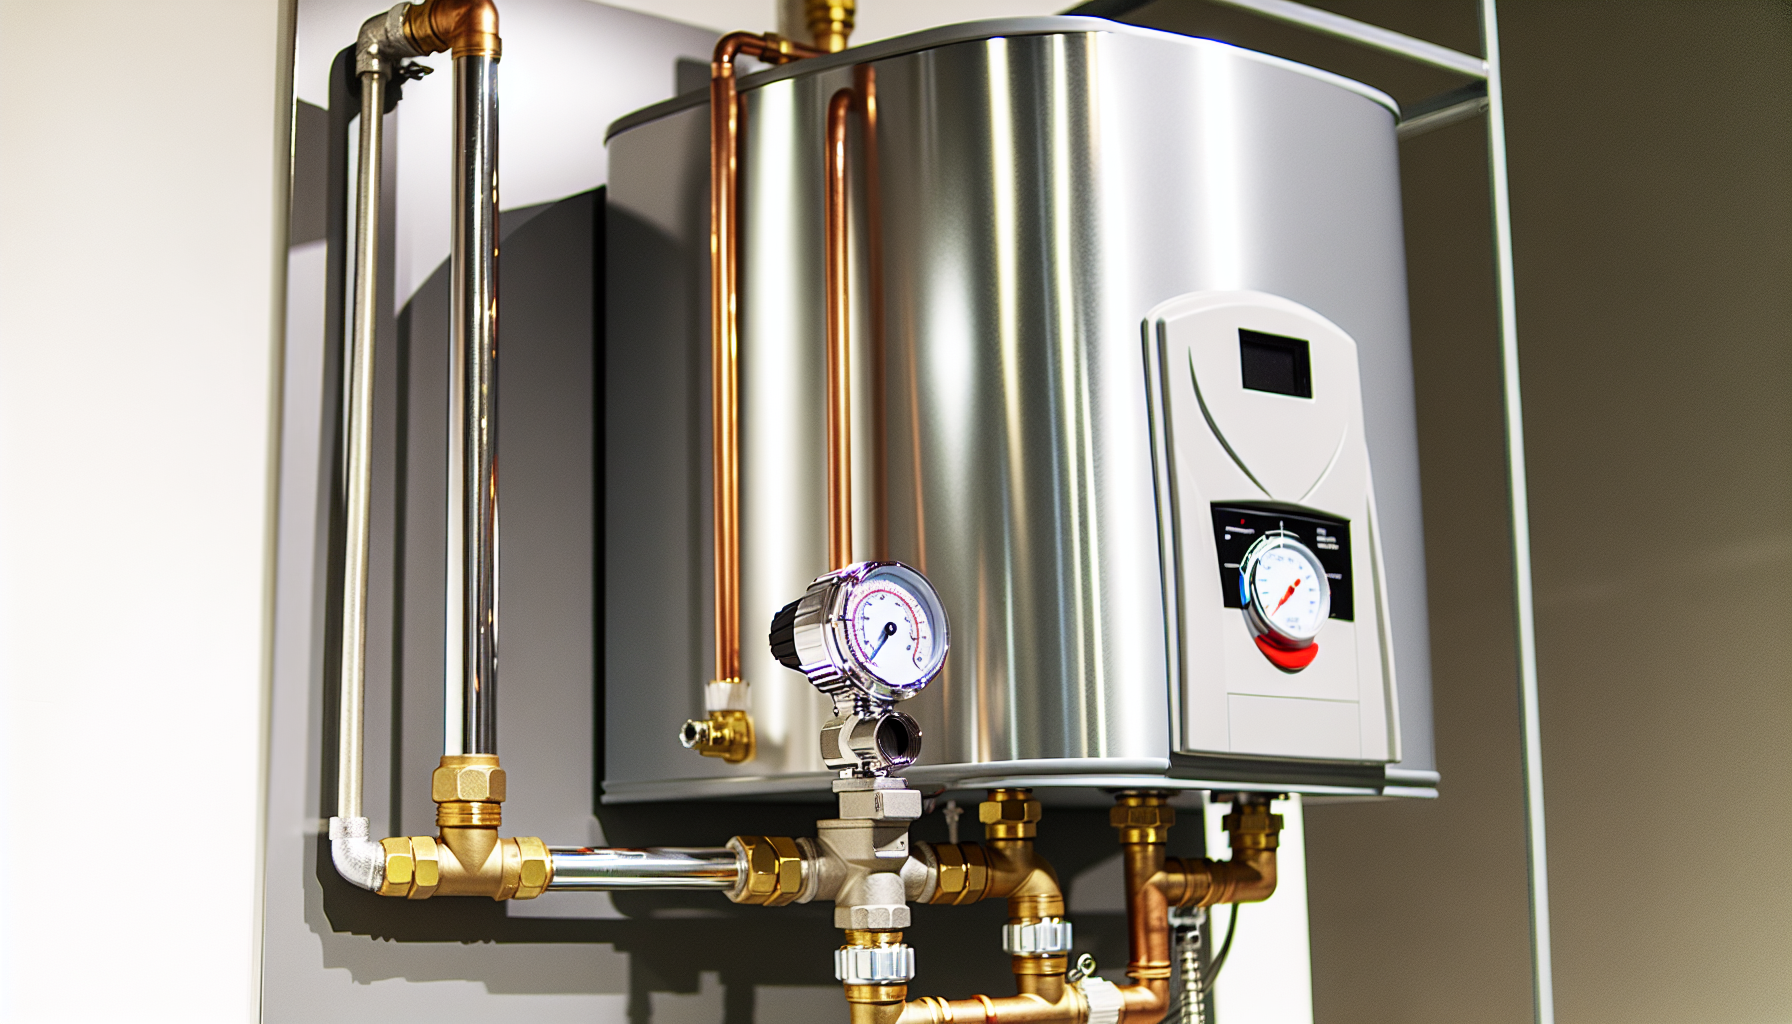 Photo of a gas hot water system